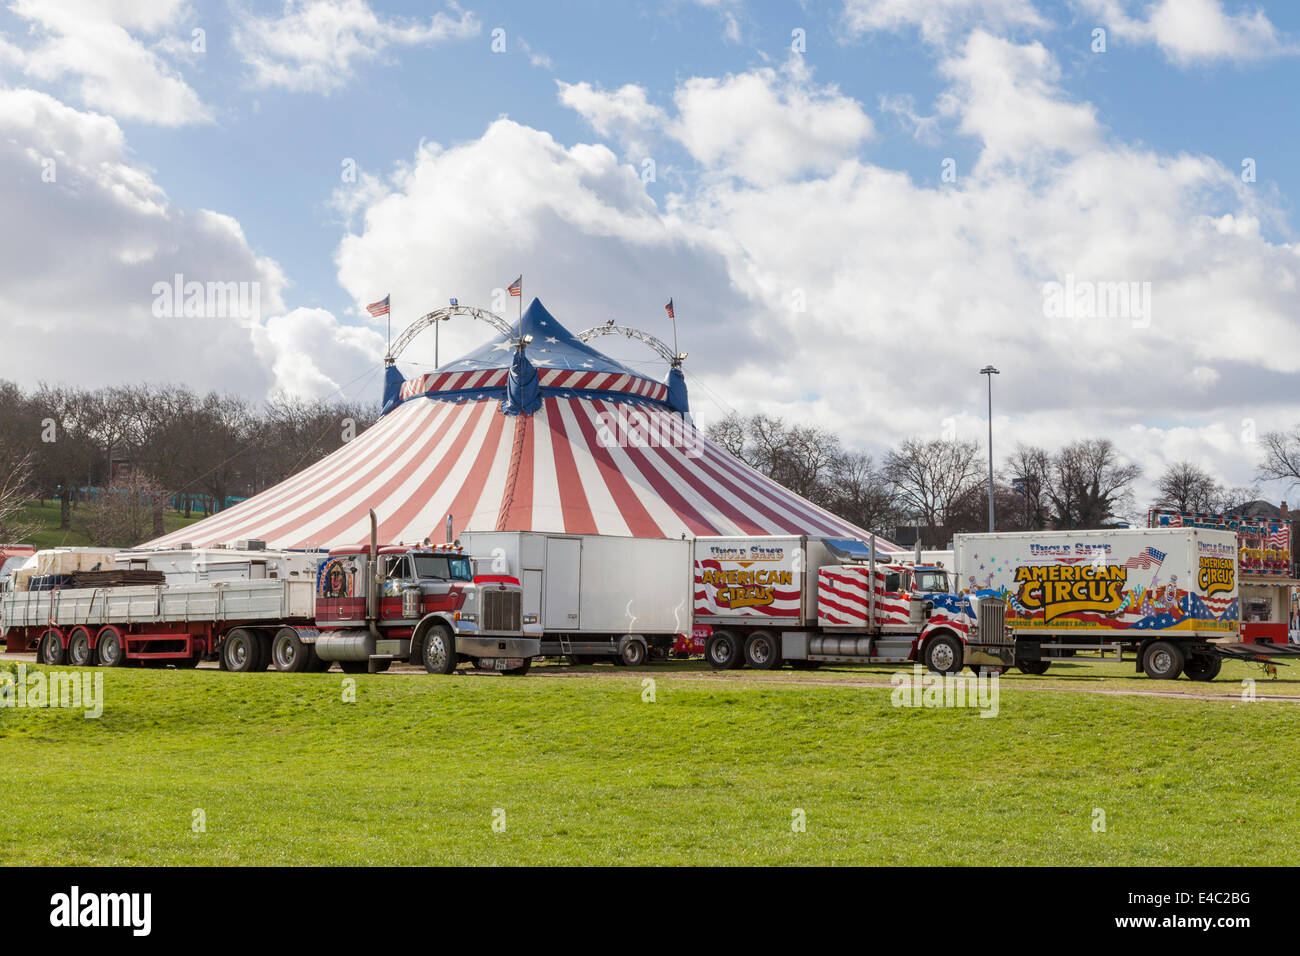 Uncle Sam's American Circus big top and vehicles, Nottingham, England, UK Stock Photo